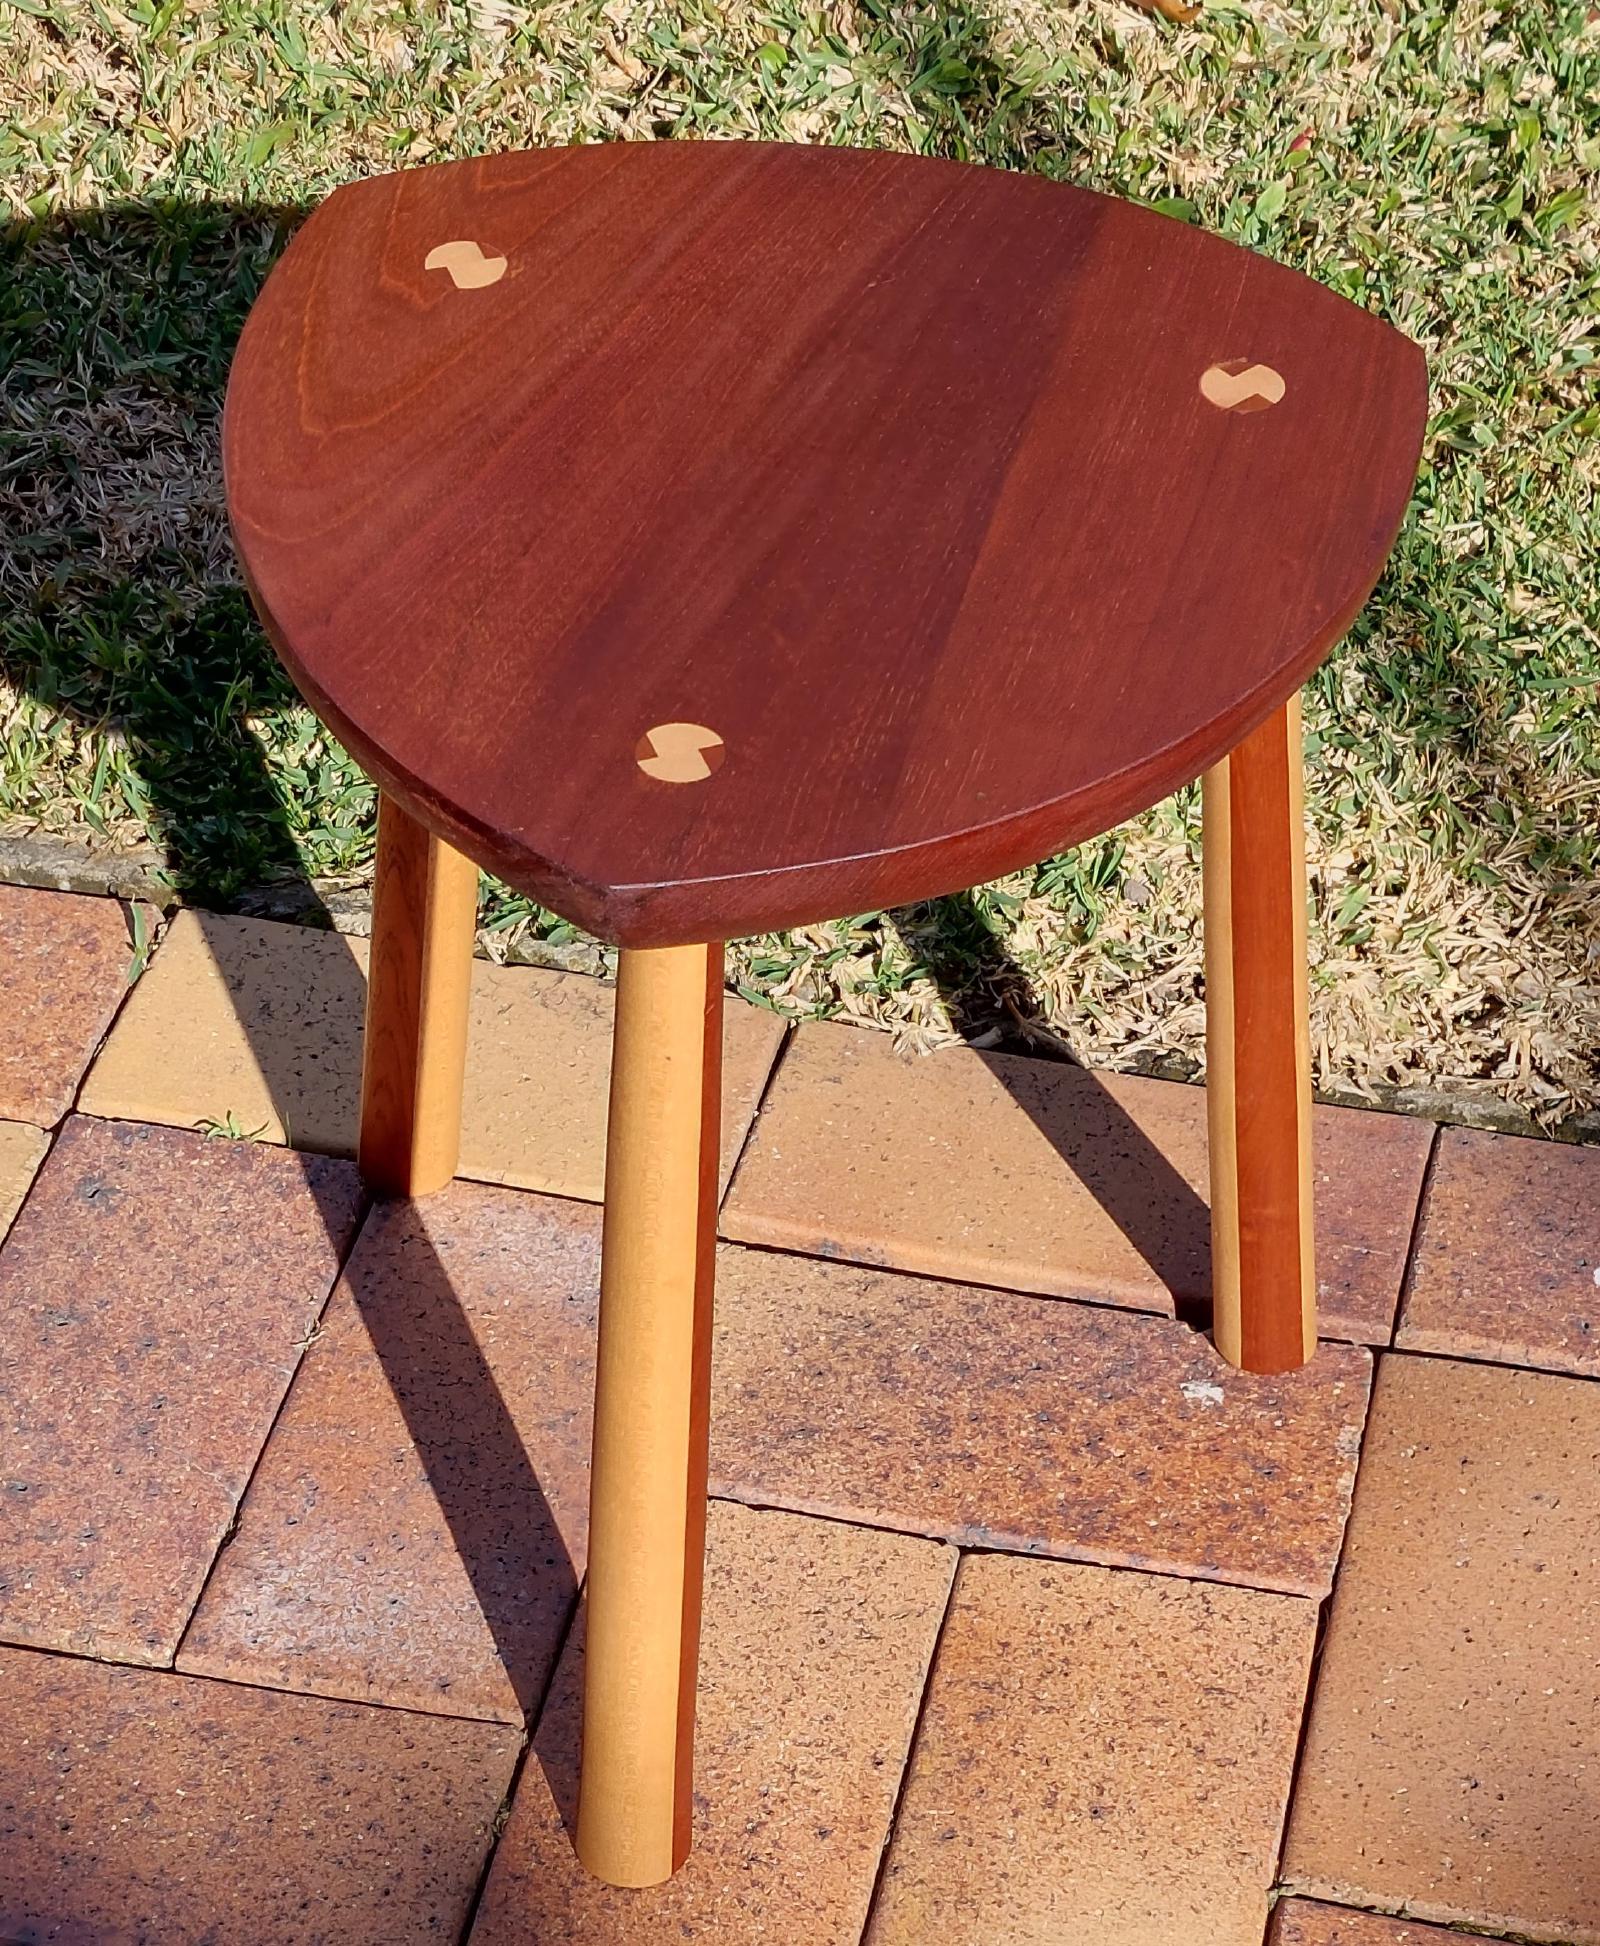 2022 - Small Stool - Red Cedar and QLD White Beech